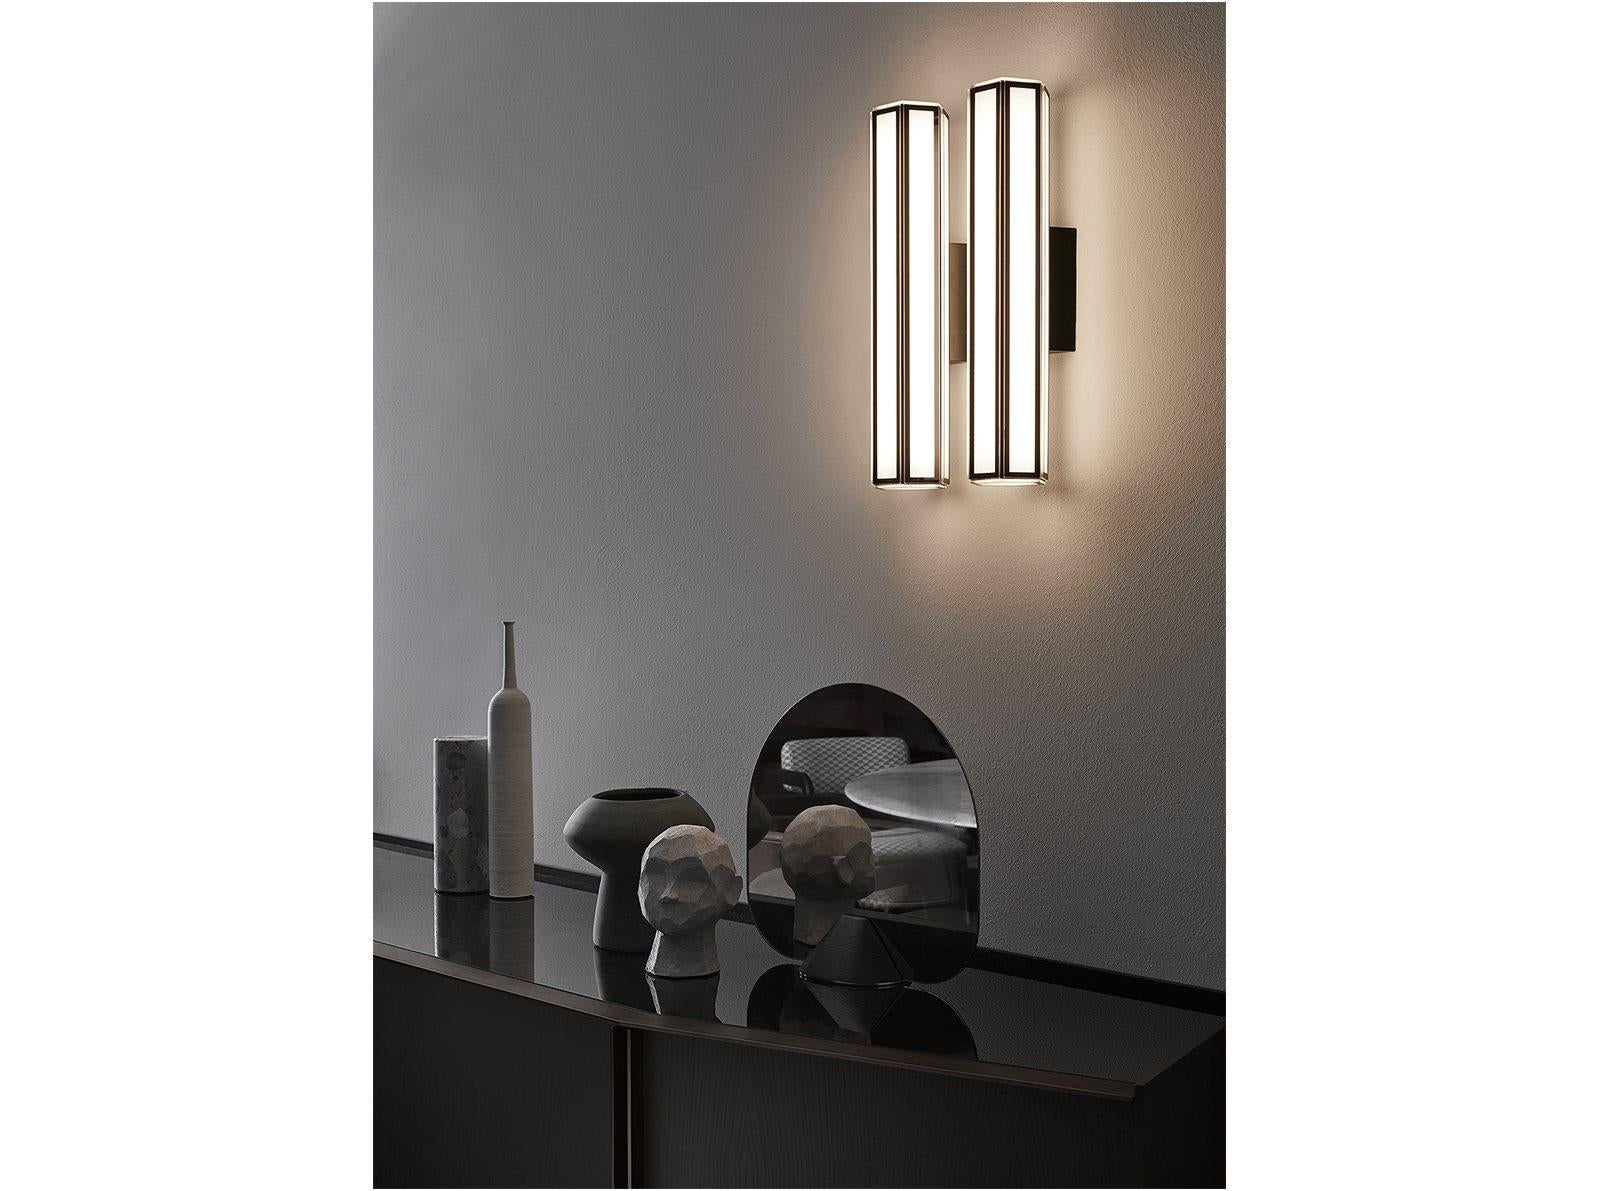 Gallotti & Radice faceted Lanterna LED wall sconce in black and white painted glass. 

Wall light with black lacquered metal structure covered by extralight screenprinted glass in two colors, white and black. 

LED light (30